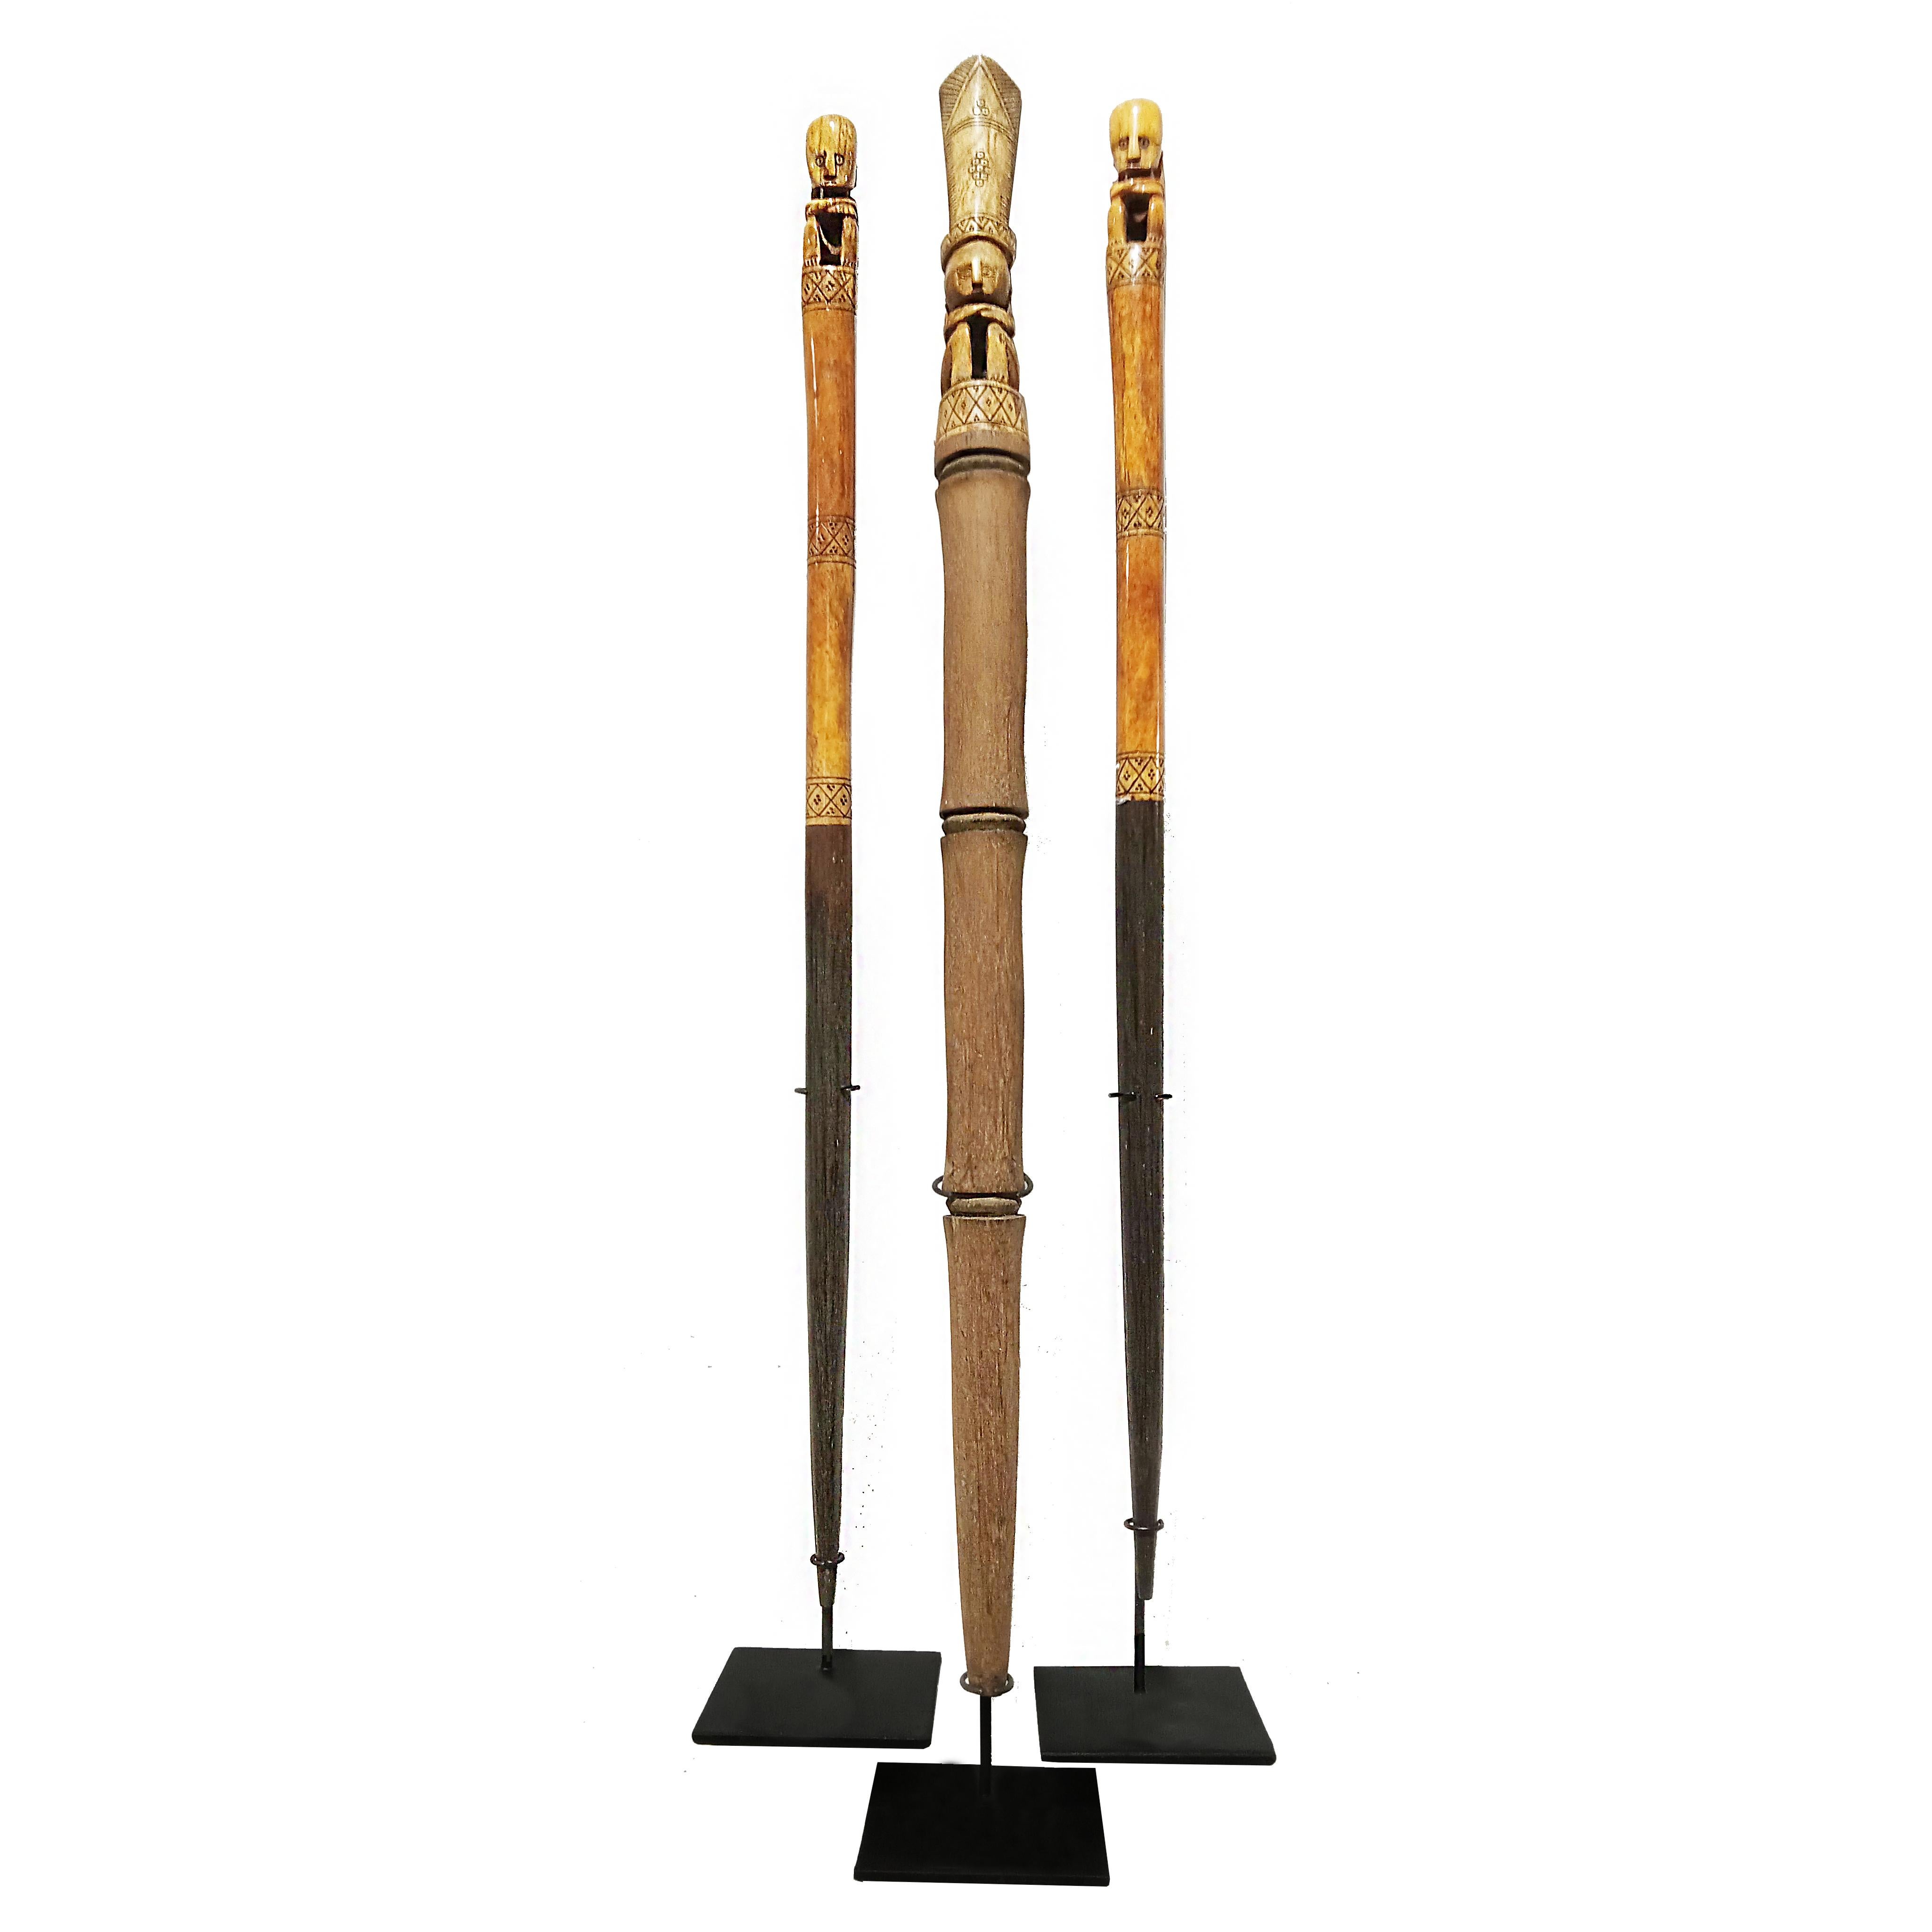 Three wooden batons, hand-carved in Indonesia, late 20th Century. 

Two of the batons are made in two-tone Suar wood, dark at the lower part, and lighter on the top part, ending in a delicately carved sitting man. The third baton is made out of